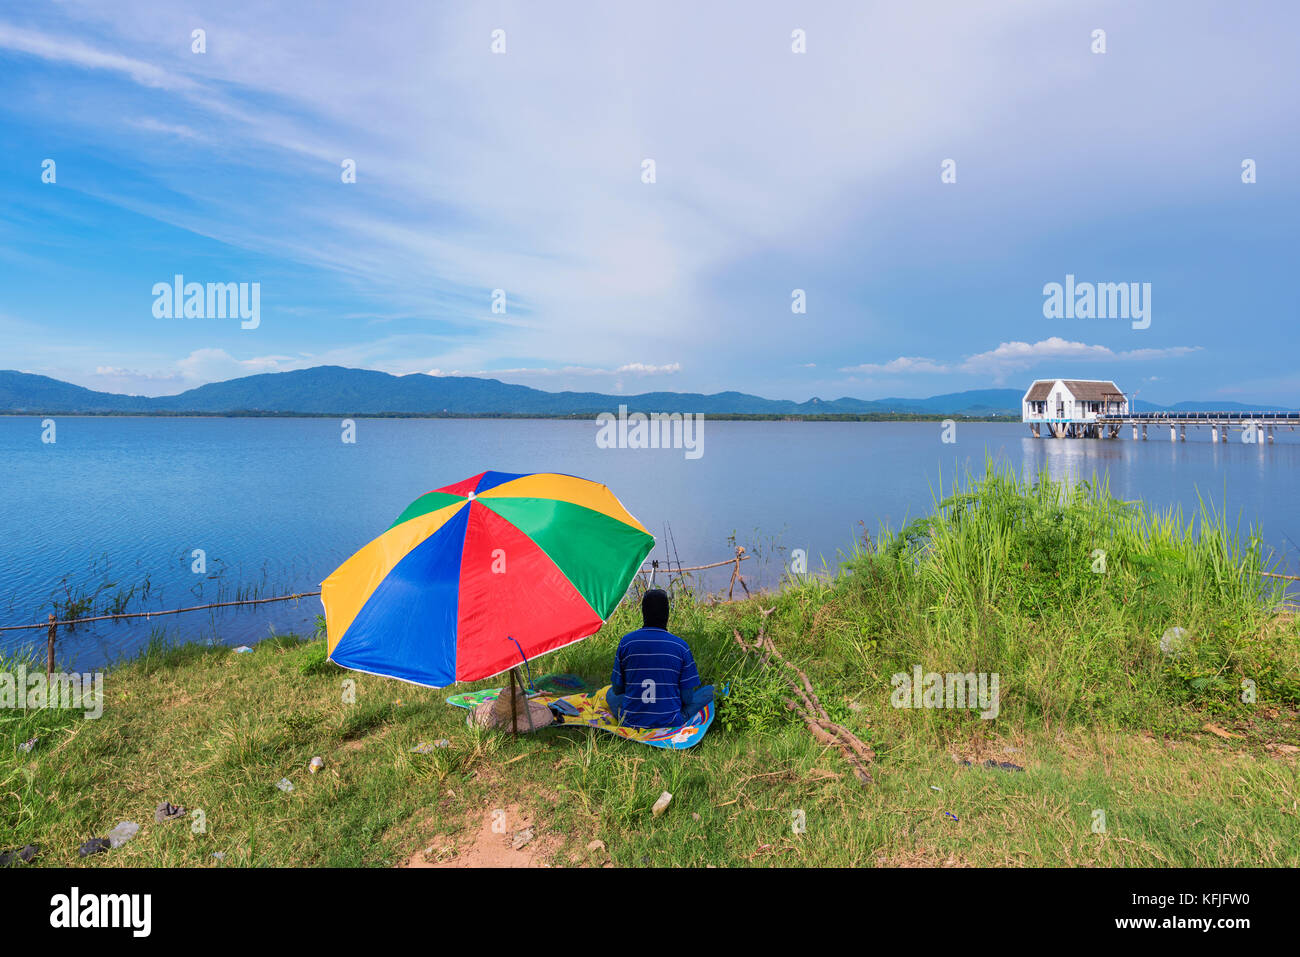 CHONBURI, THAILAND - AUGUST 10: This is Bang Phra reservoir with a fisherman sitting by the lake. Bang Phra is a popular fishing spot amongst locals o Stock Photo